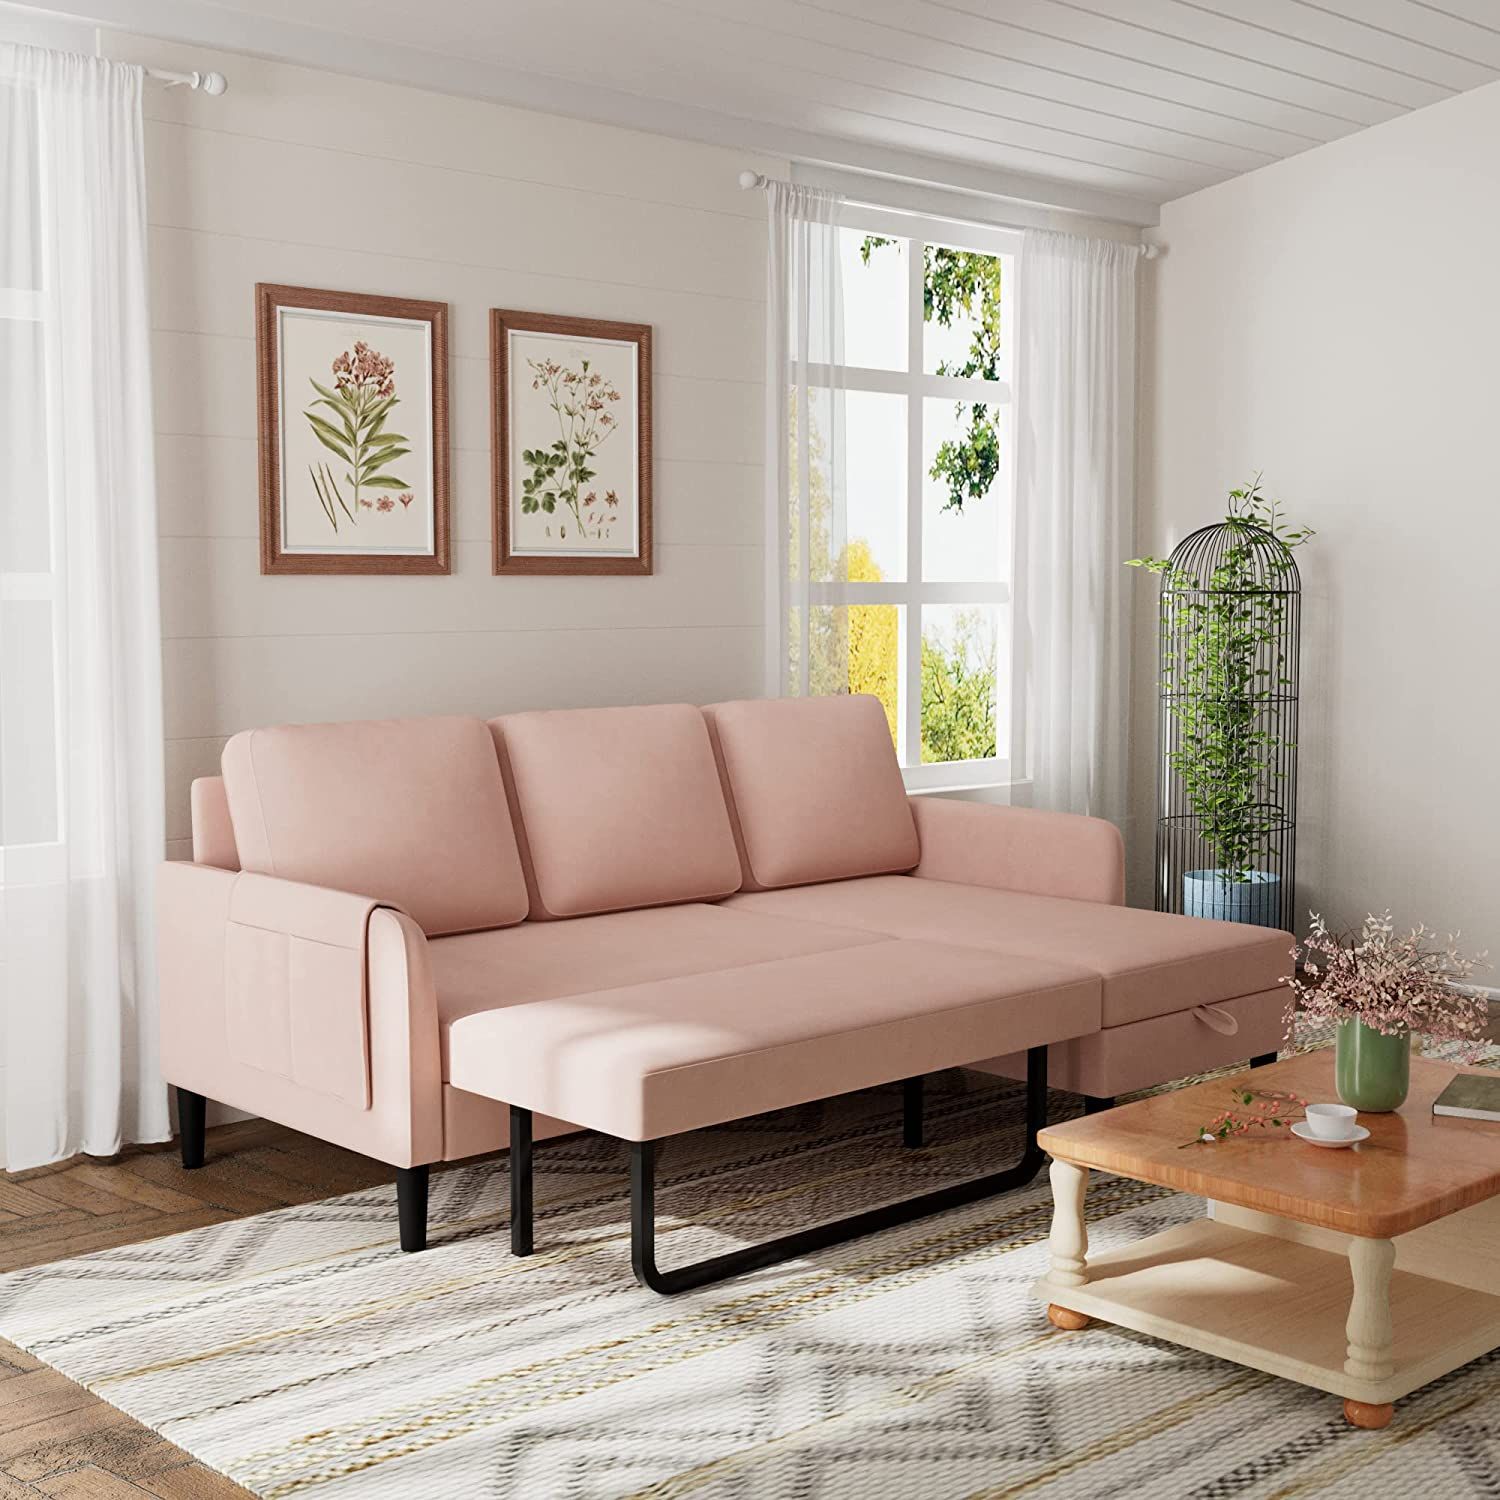 Sectional Sofa With Bed You’ll Enjoy